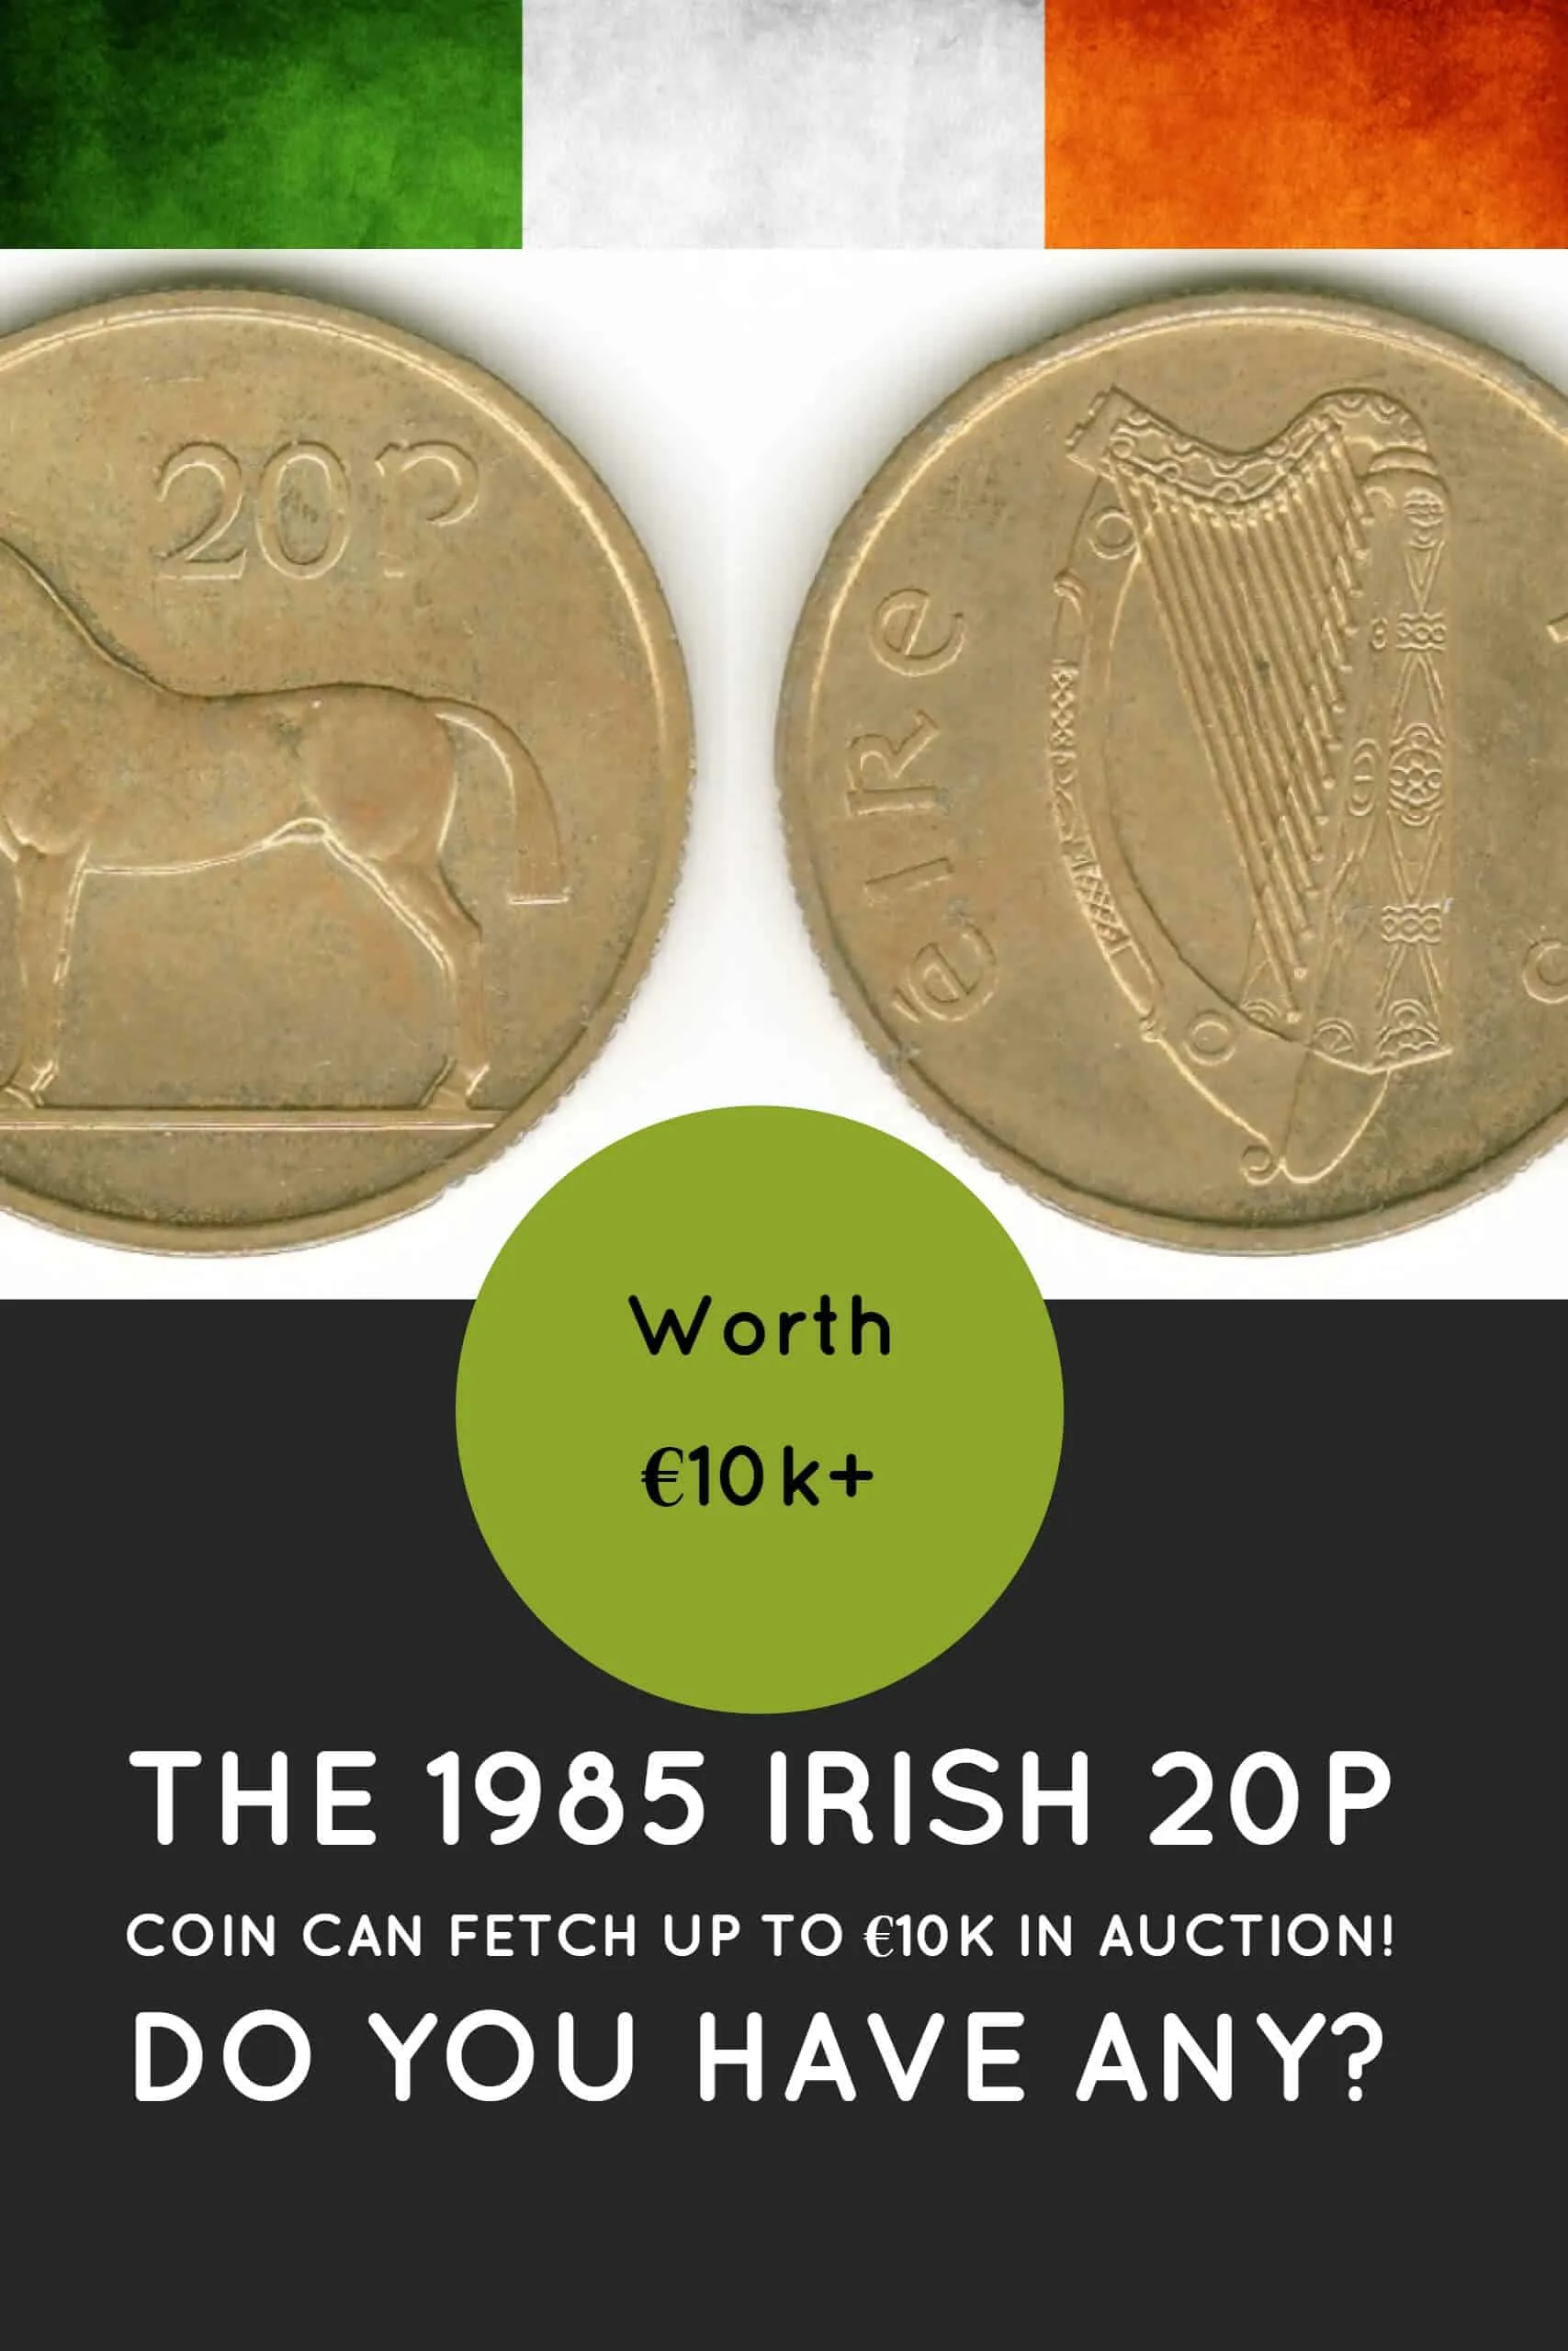 20p old Irish coins could fetch up to 10k at auction